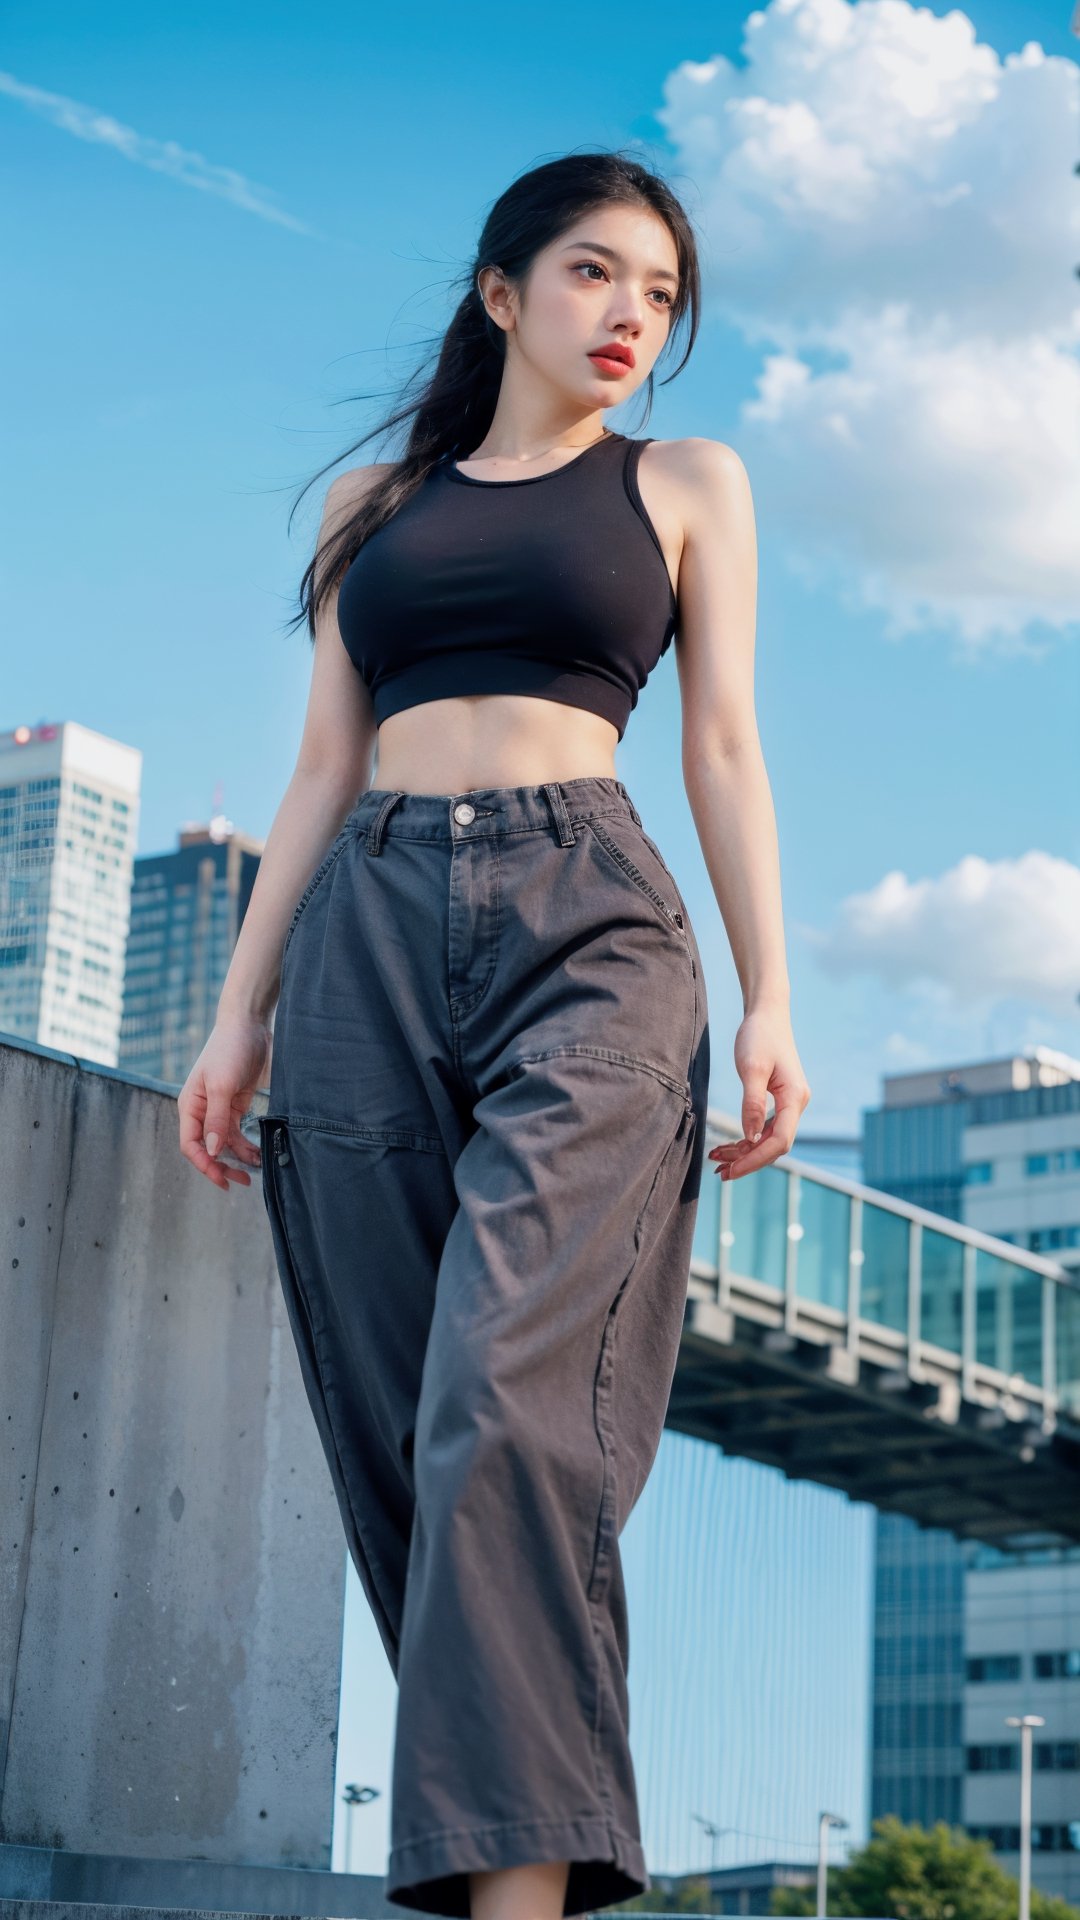 "A towering Giantess in a cool and laid-back hippie style is rocking a crop top and baggy pants. Her toned and athletic build hints at her massive strength. She seems to be casually strolling through the bustling cityscape of GTS City, as towering buildings loom overhead. Smoke and clouds roil around her, adding to the sense of epic scale and drama. The lighting is dark, gloomy, and realistic, creating a tense and ominous atmosphere. The perspective is from below, emphasizing the sheer majesty and power of the Giantess."